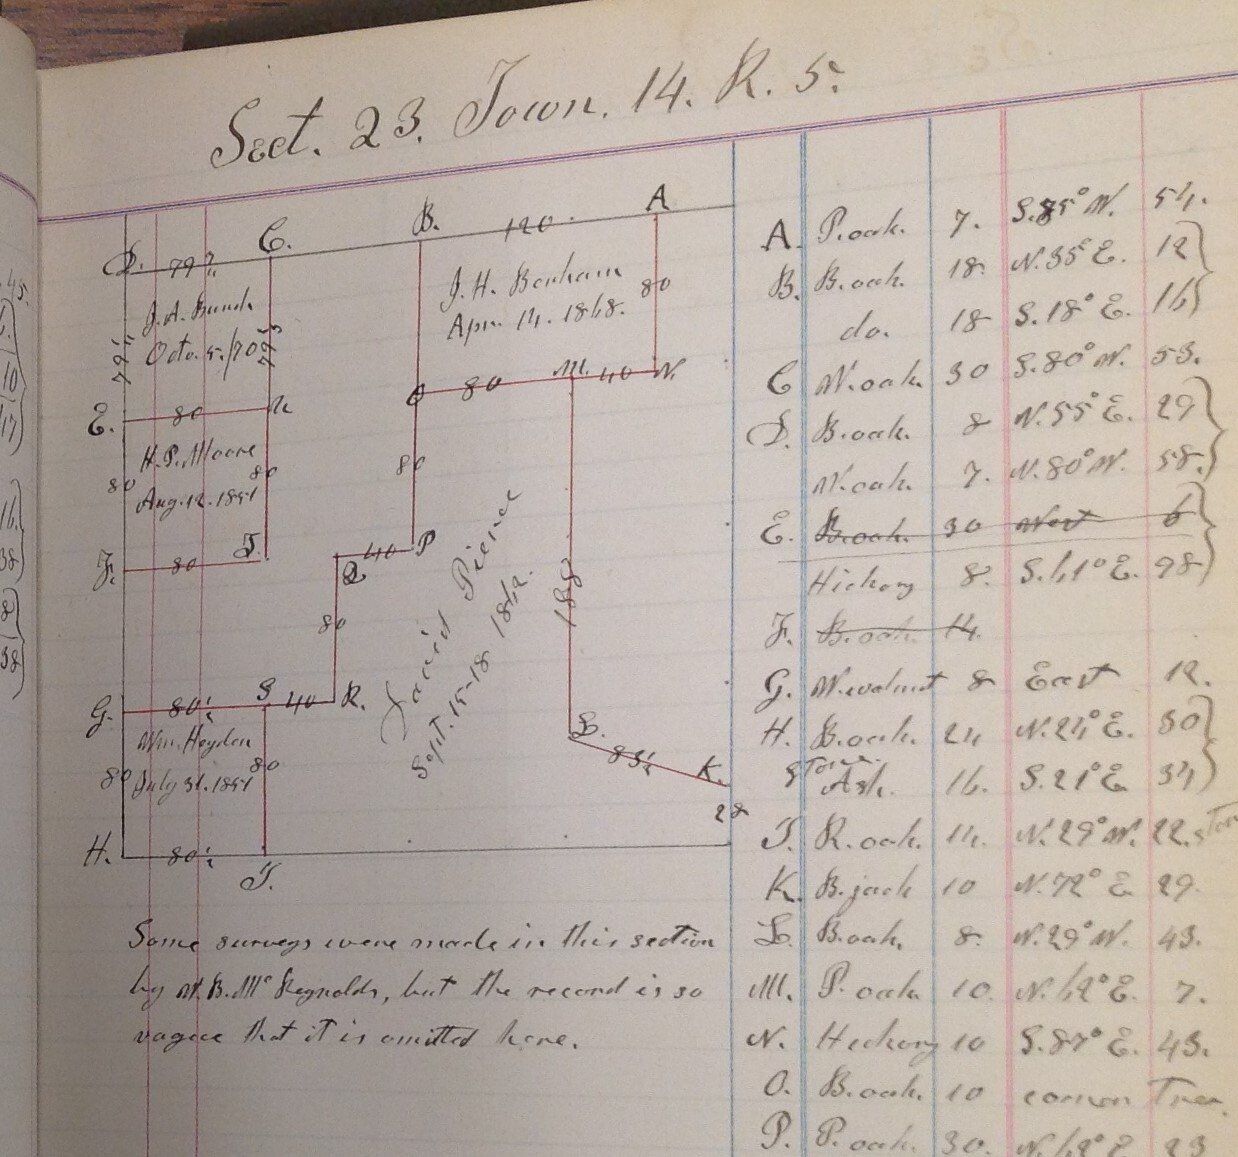 UPDATE - Pope County, Illinois Survey Book Now Digitized!